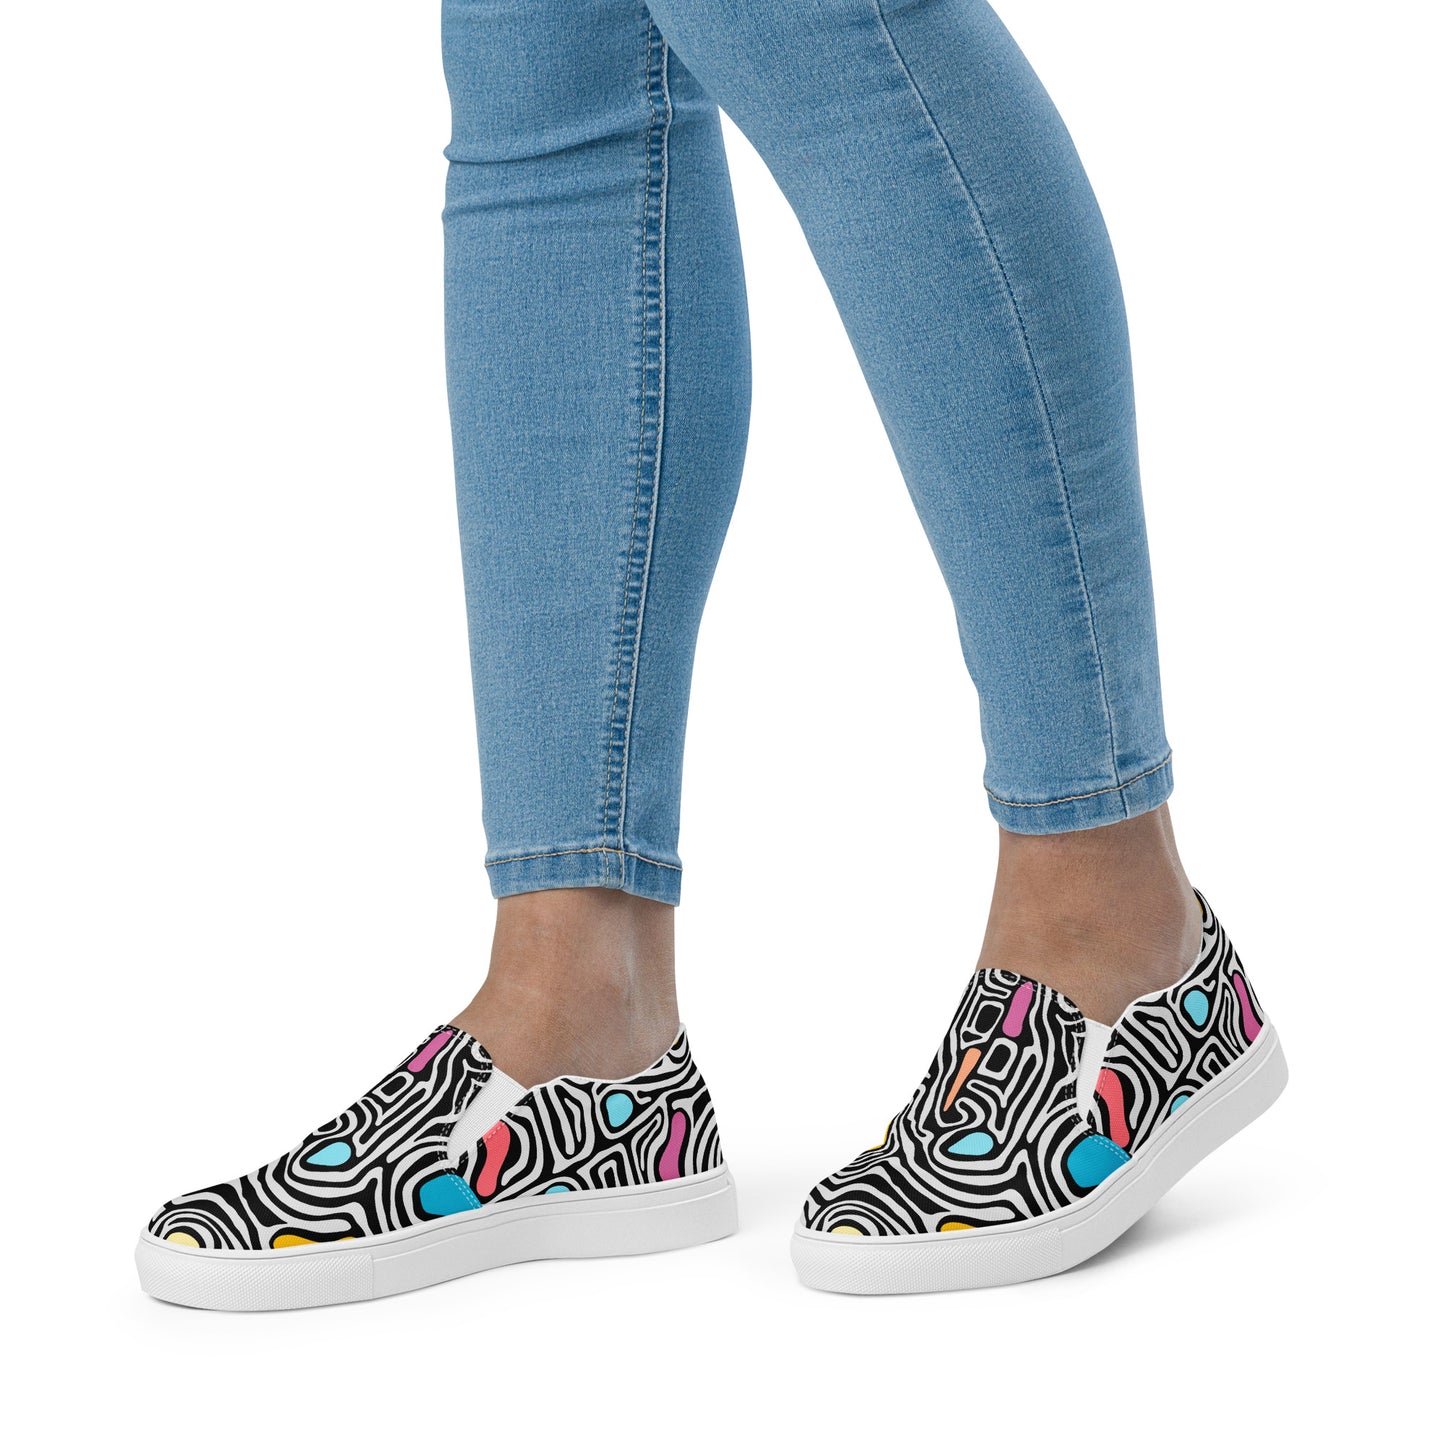 Trippy - Women’s slip-on canvas shoes Womens Slip On Shoes